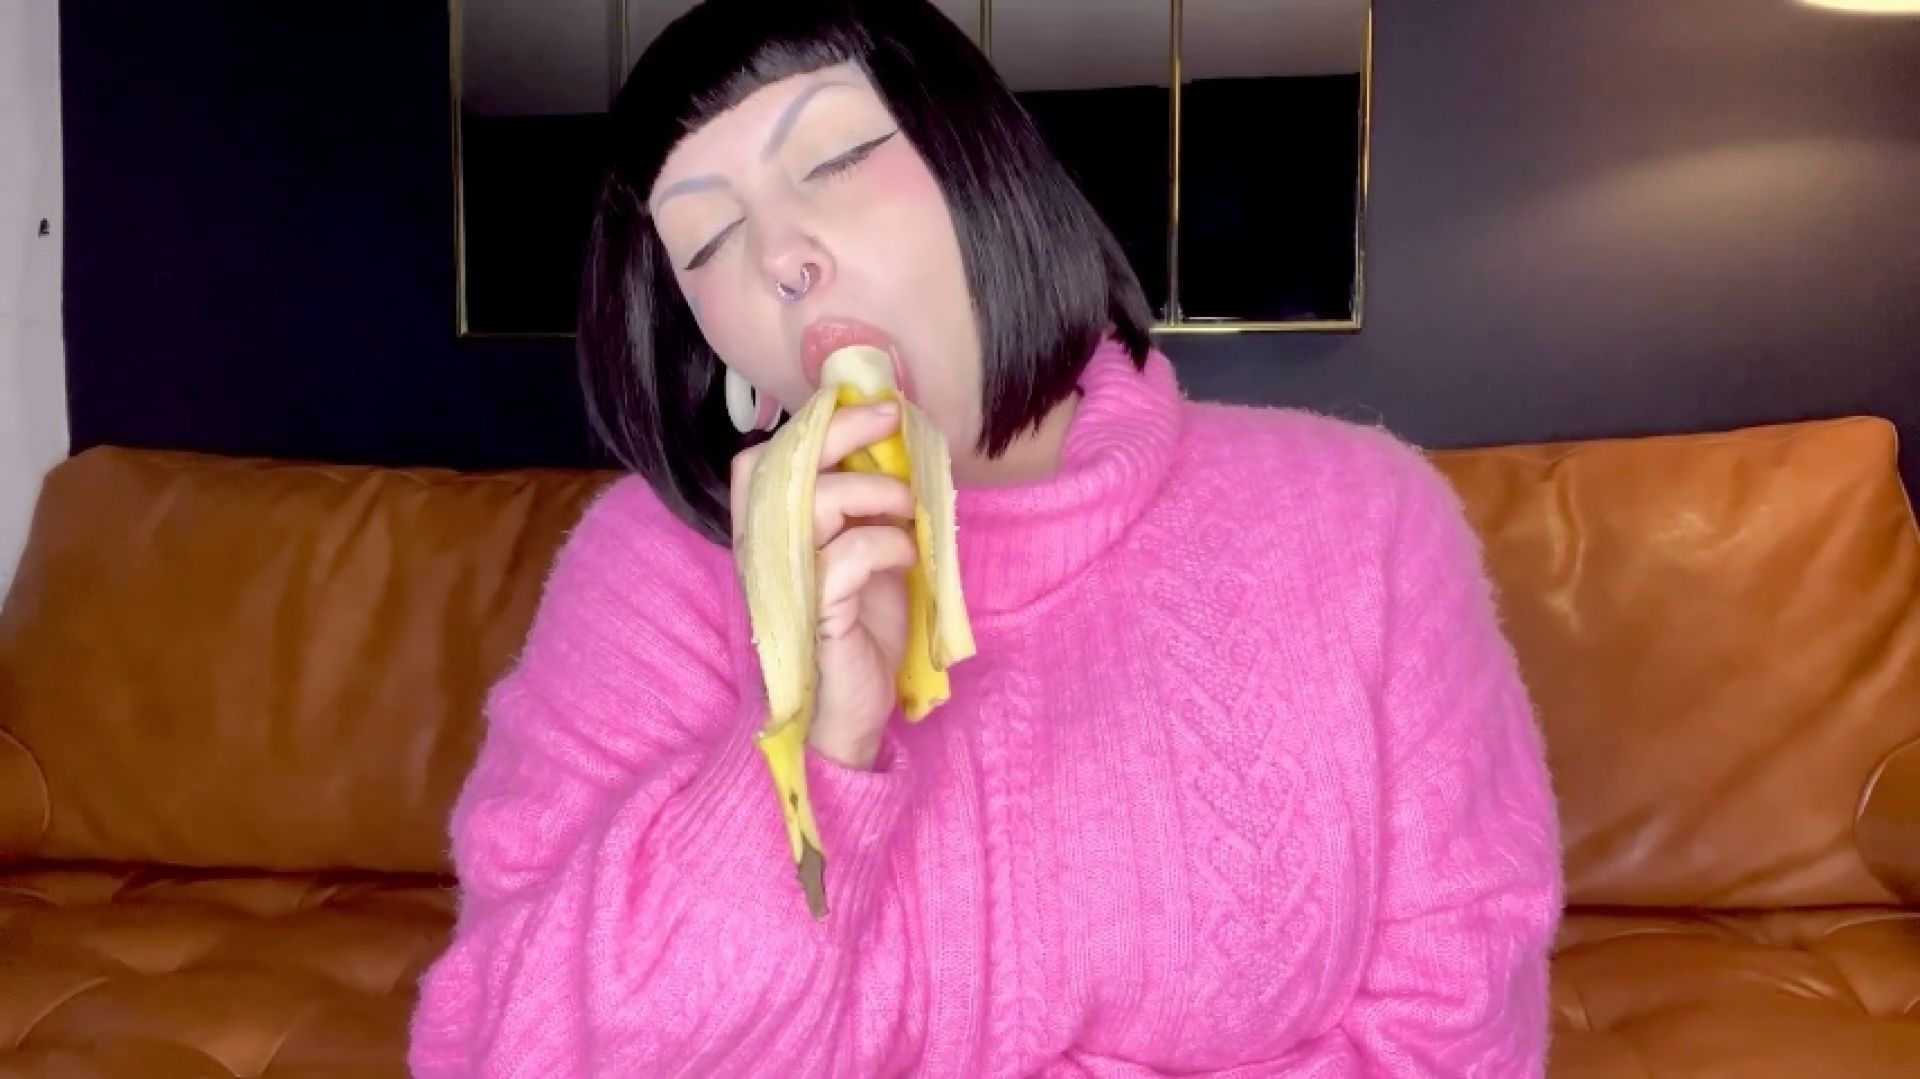 BBW teases you with banana eating